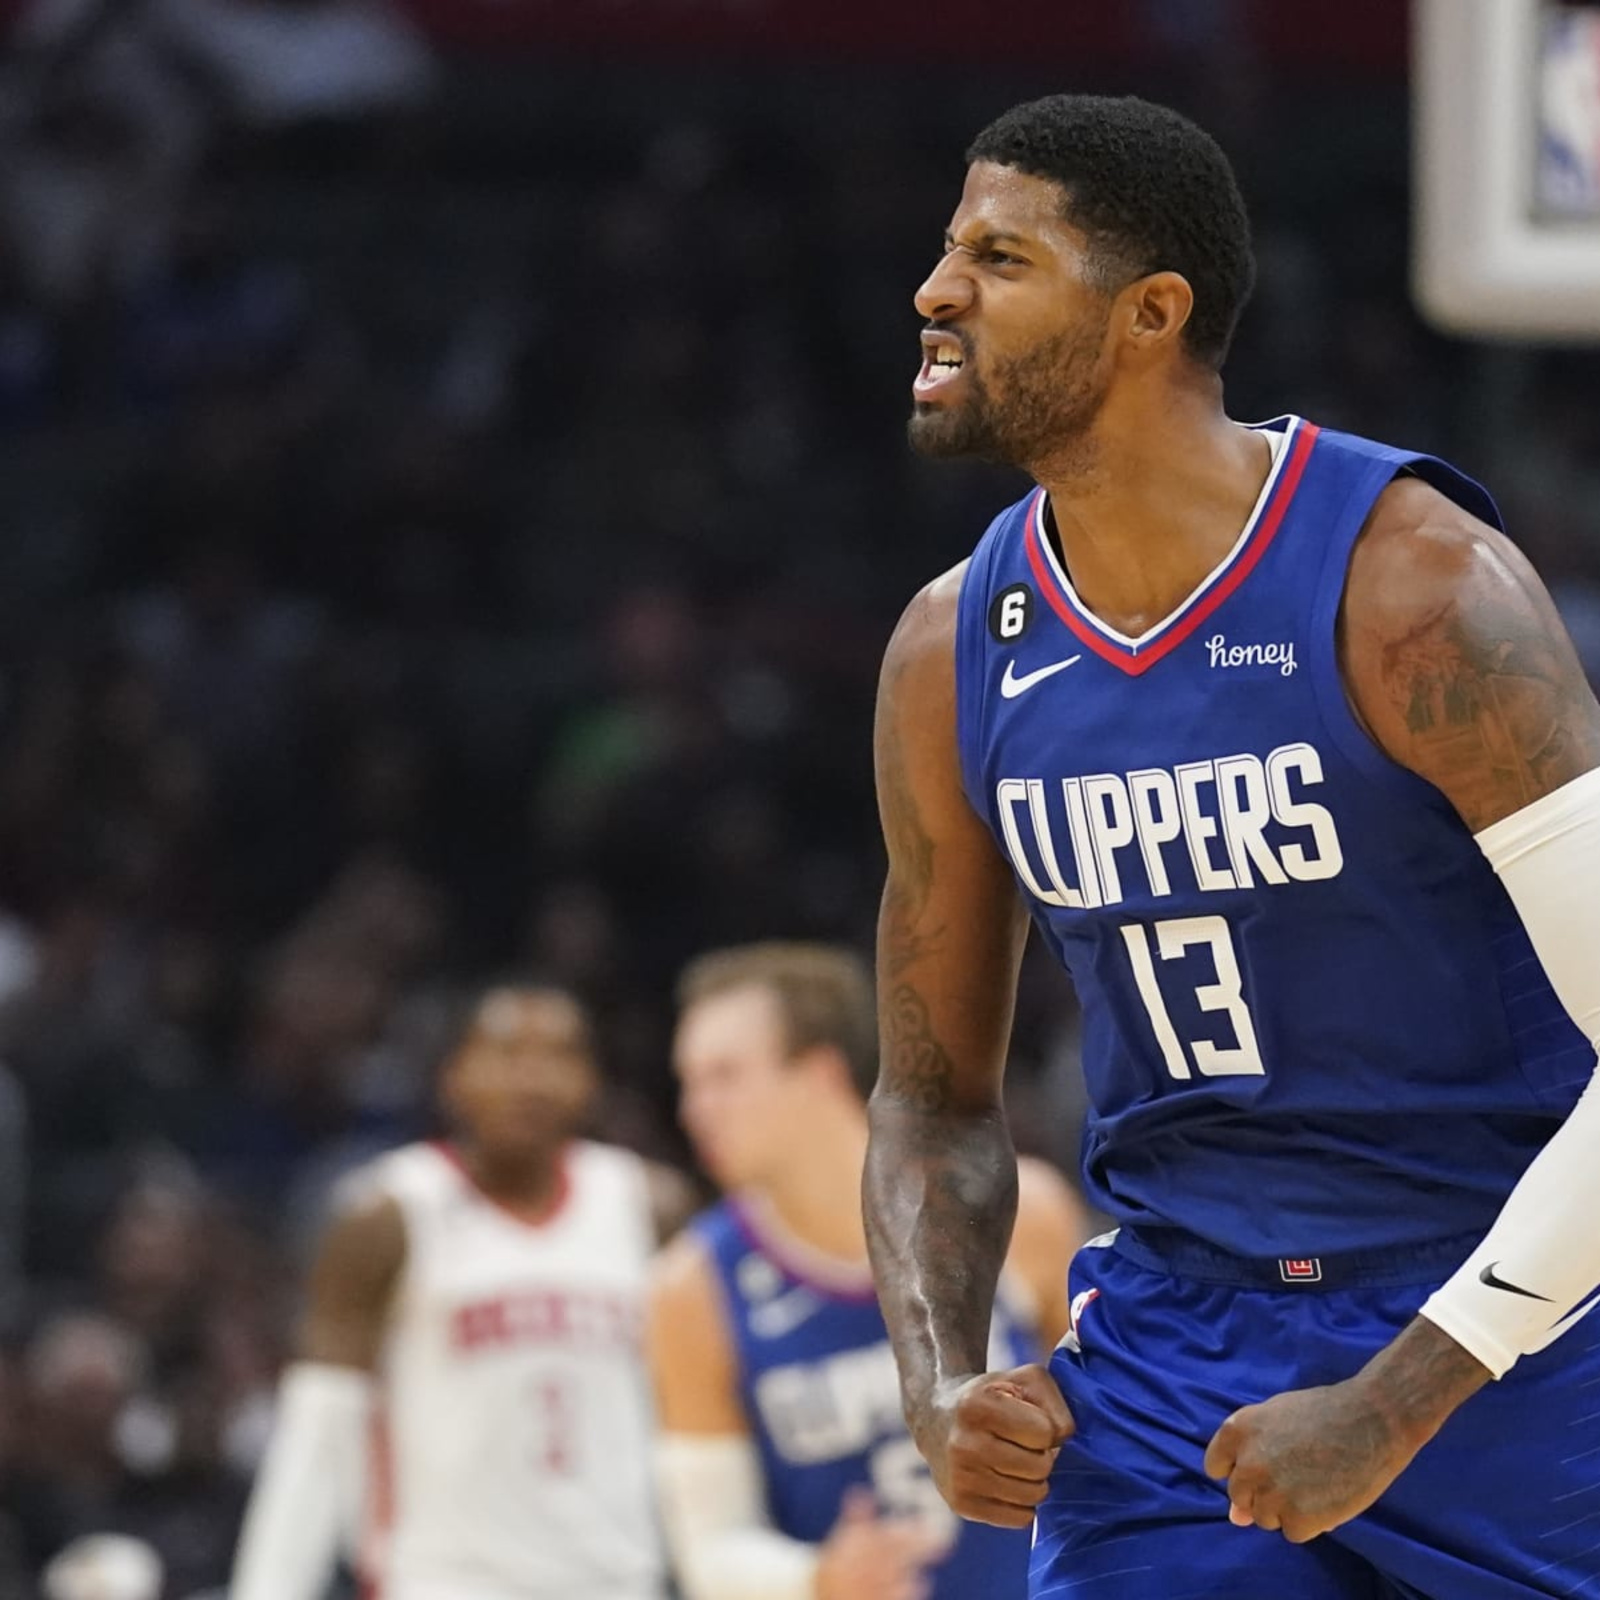 Paul George Says 'Line Was Passed' While Speaking About Feud With